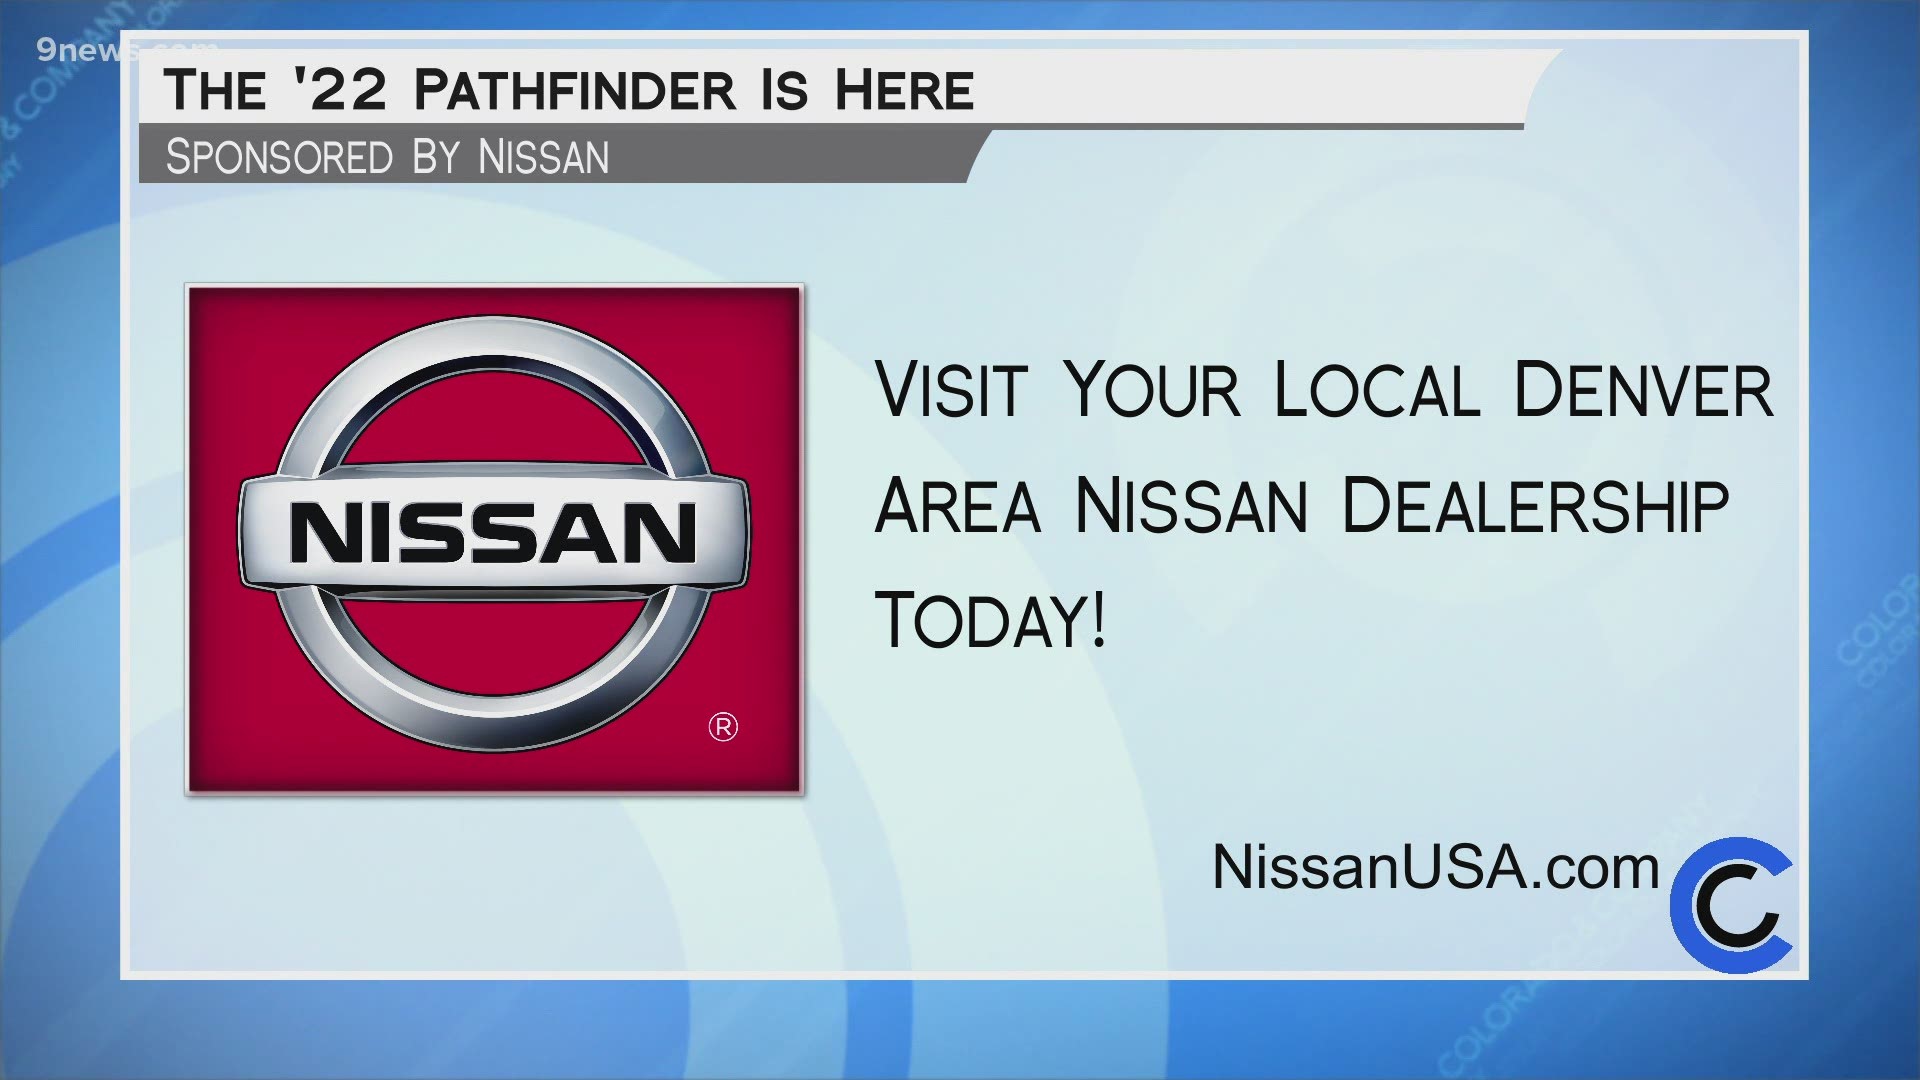 The 2022 Nissan Pathfinder is out and available for a test drive. Find one at your local Nissan Dealer--visit NissanUSA.com.